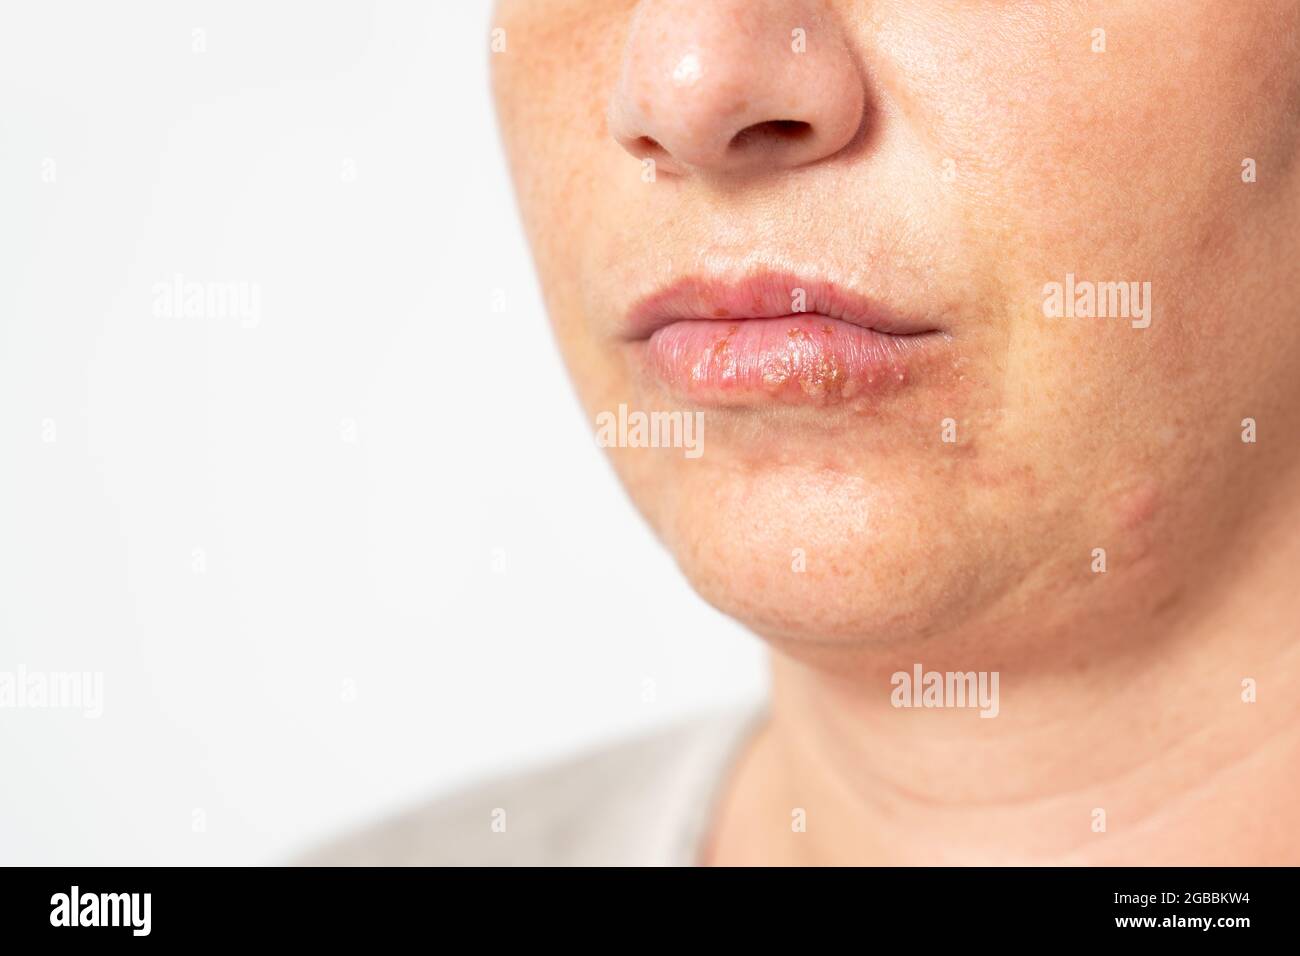 Young woman suffering from herpes on her lips. Concept skin problem, allergy and dermatology. High quality photo Stock Photo